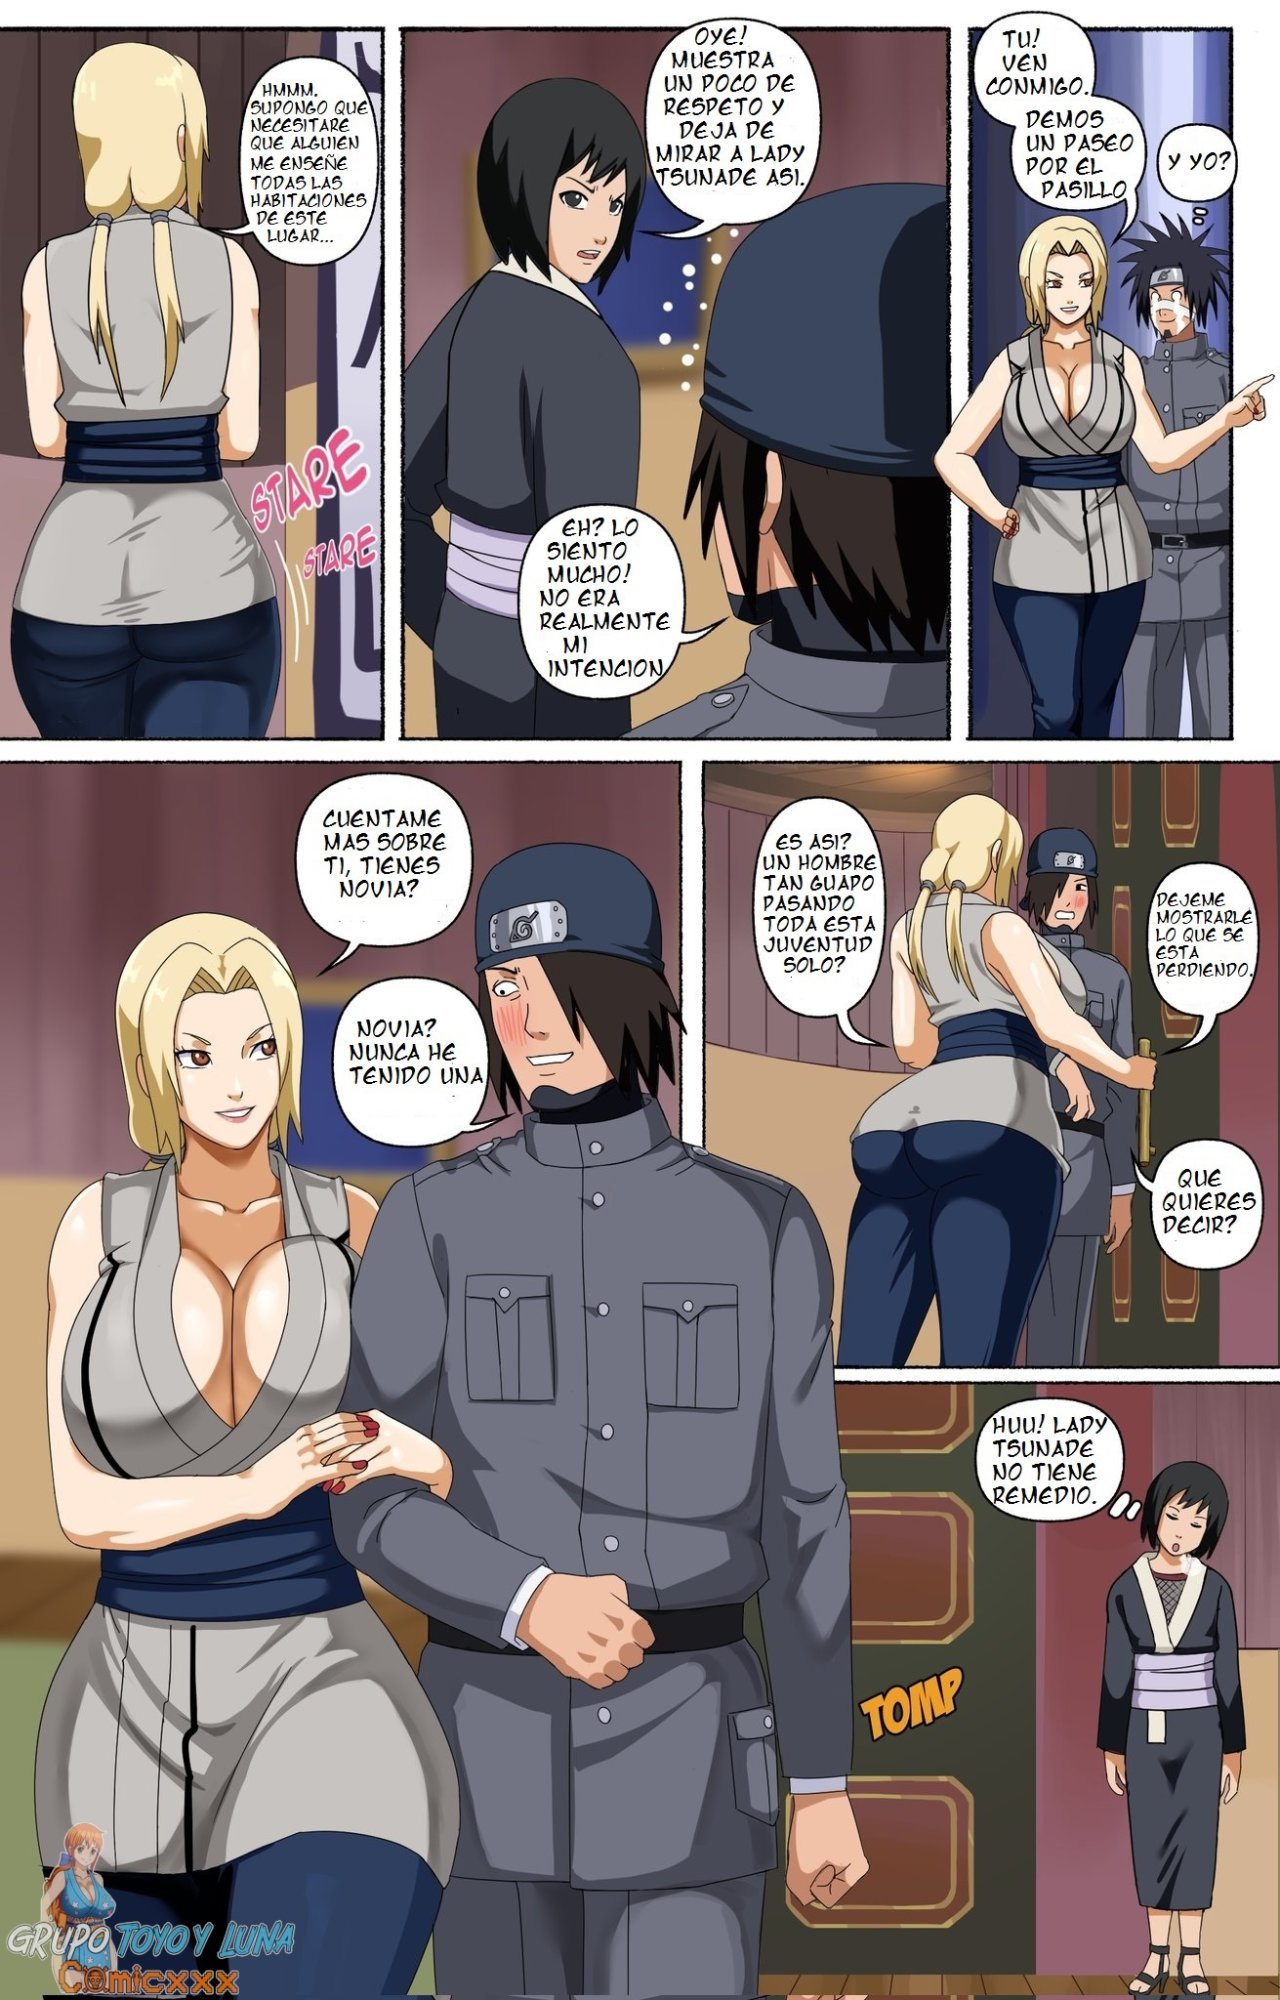 Tsunade and his assistants - 2